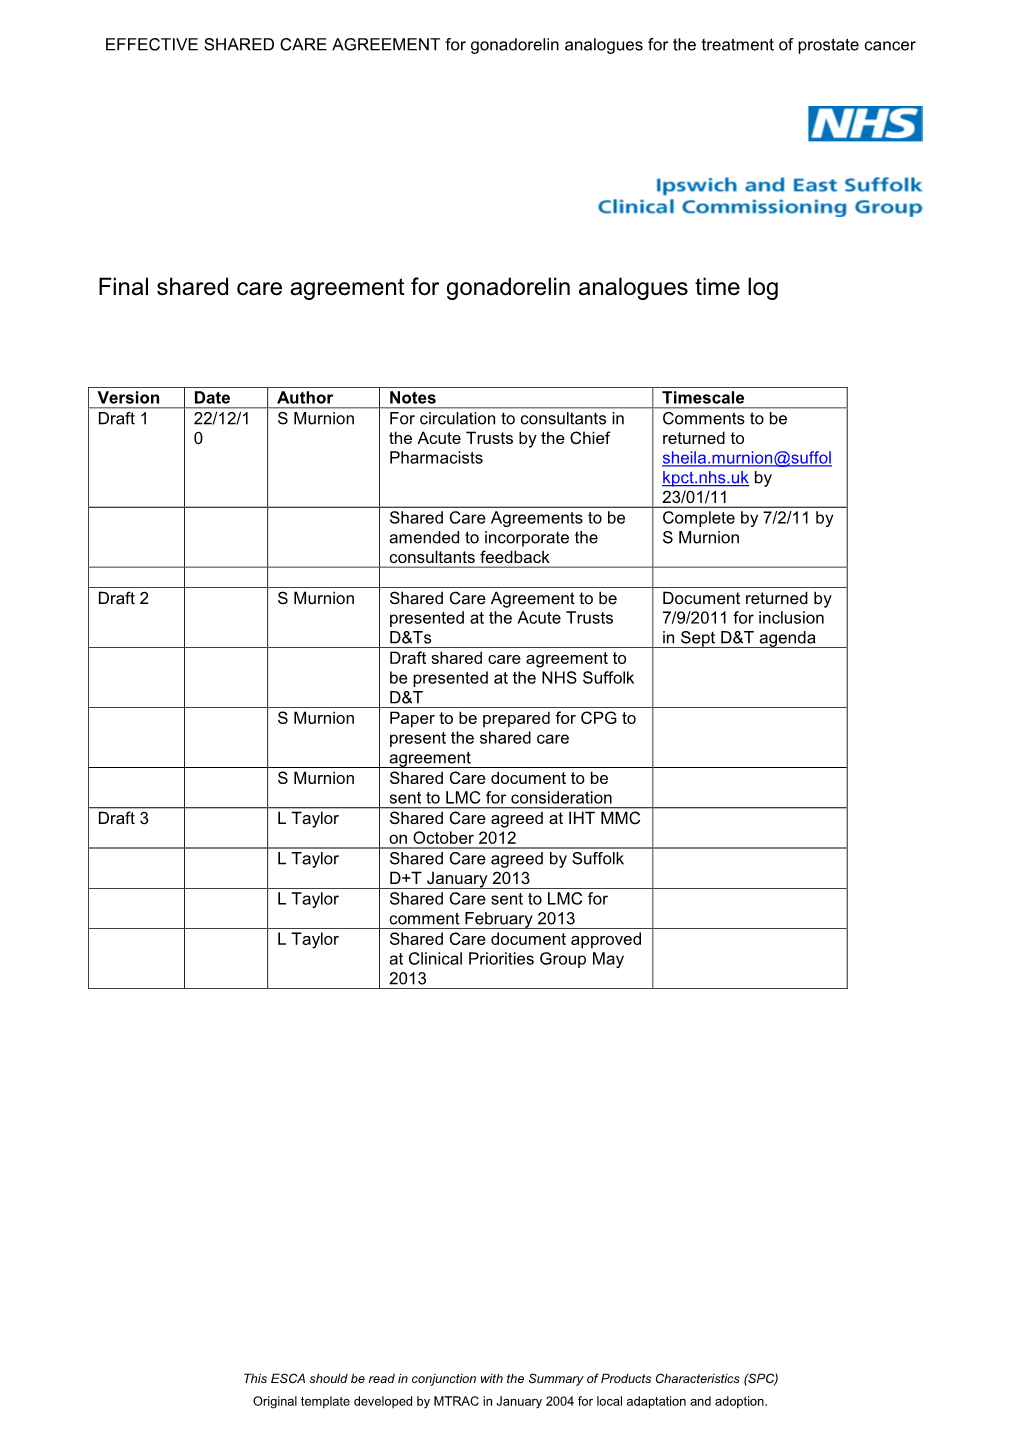 Final Shared Care Agreement for Gonadorelin Analogues Time Log